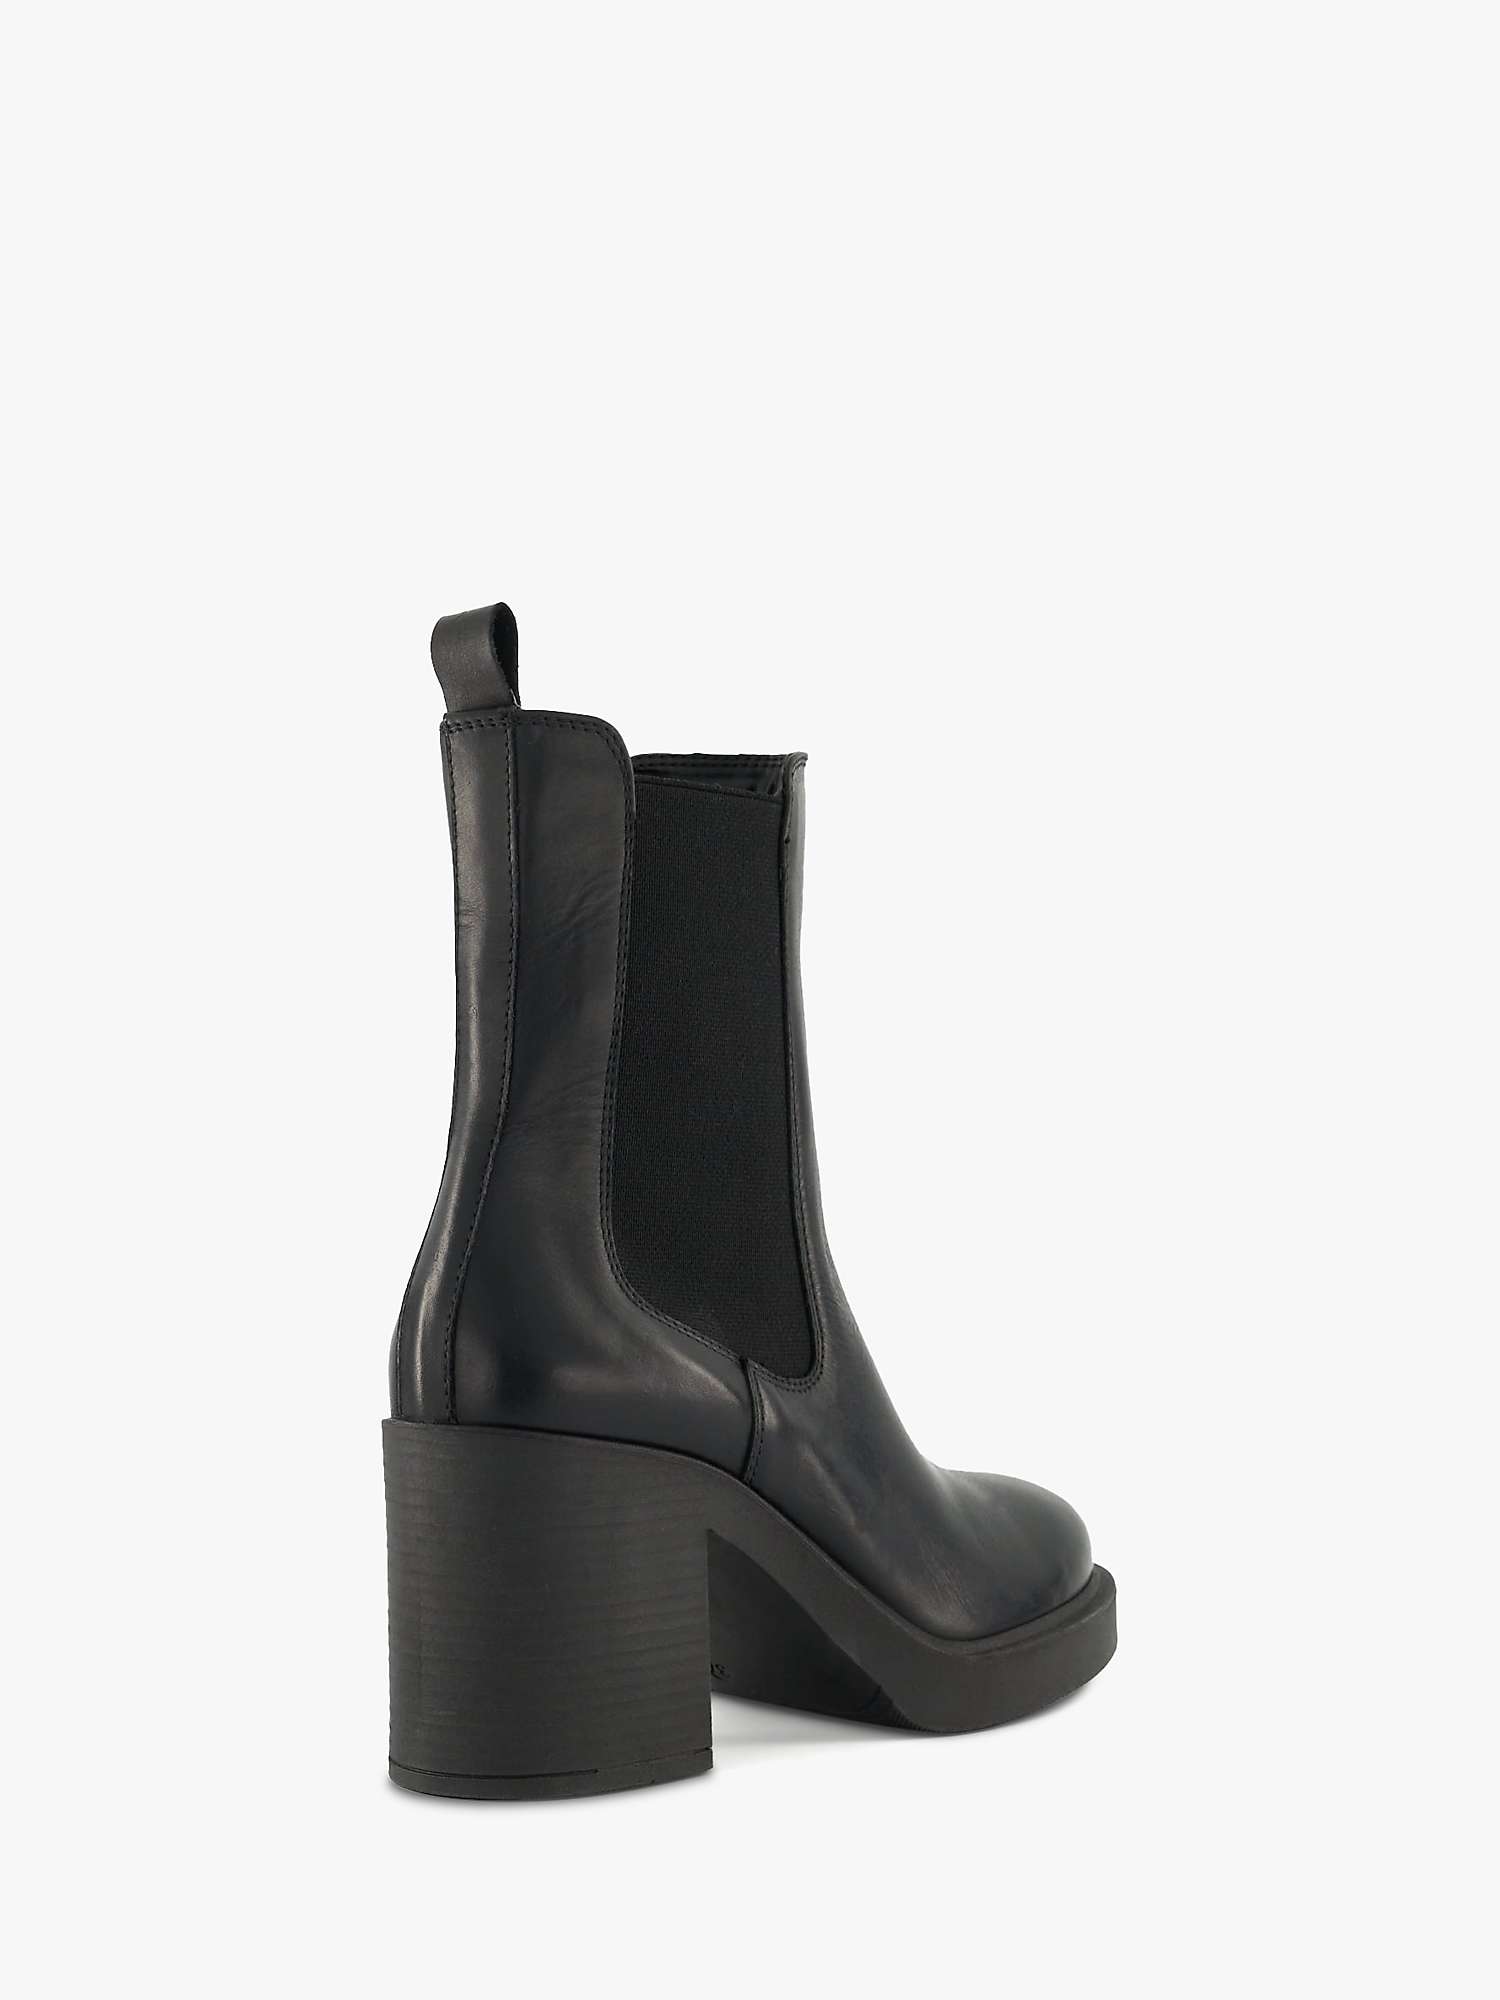 Dune Pinaz Leather Chelsea Boots, Black at John Lewis & Partners